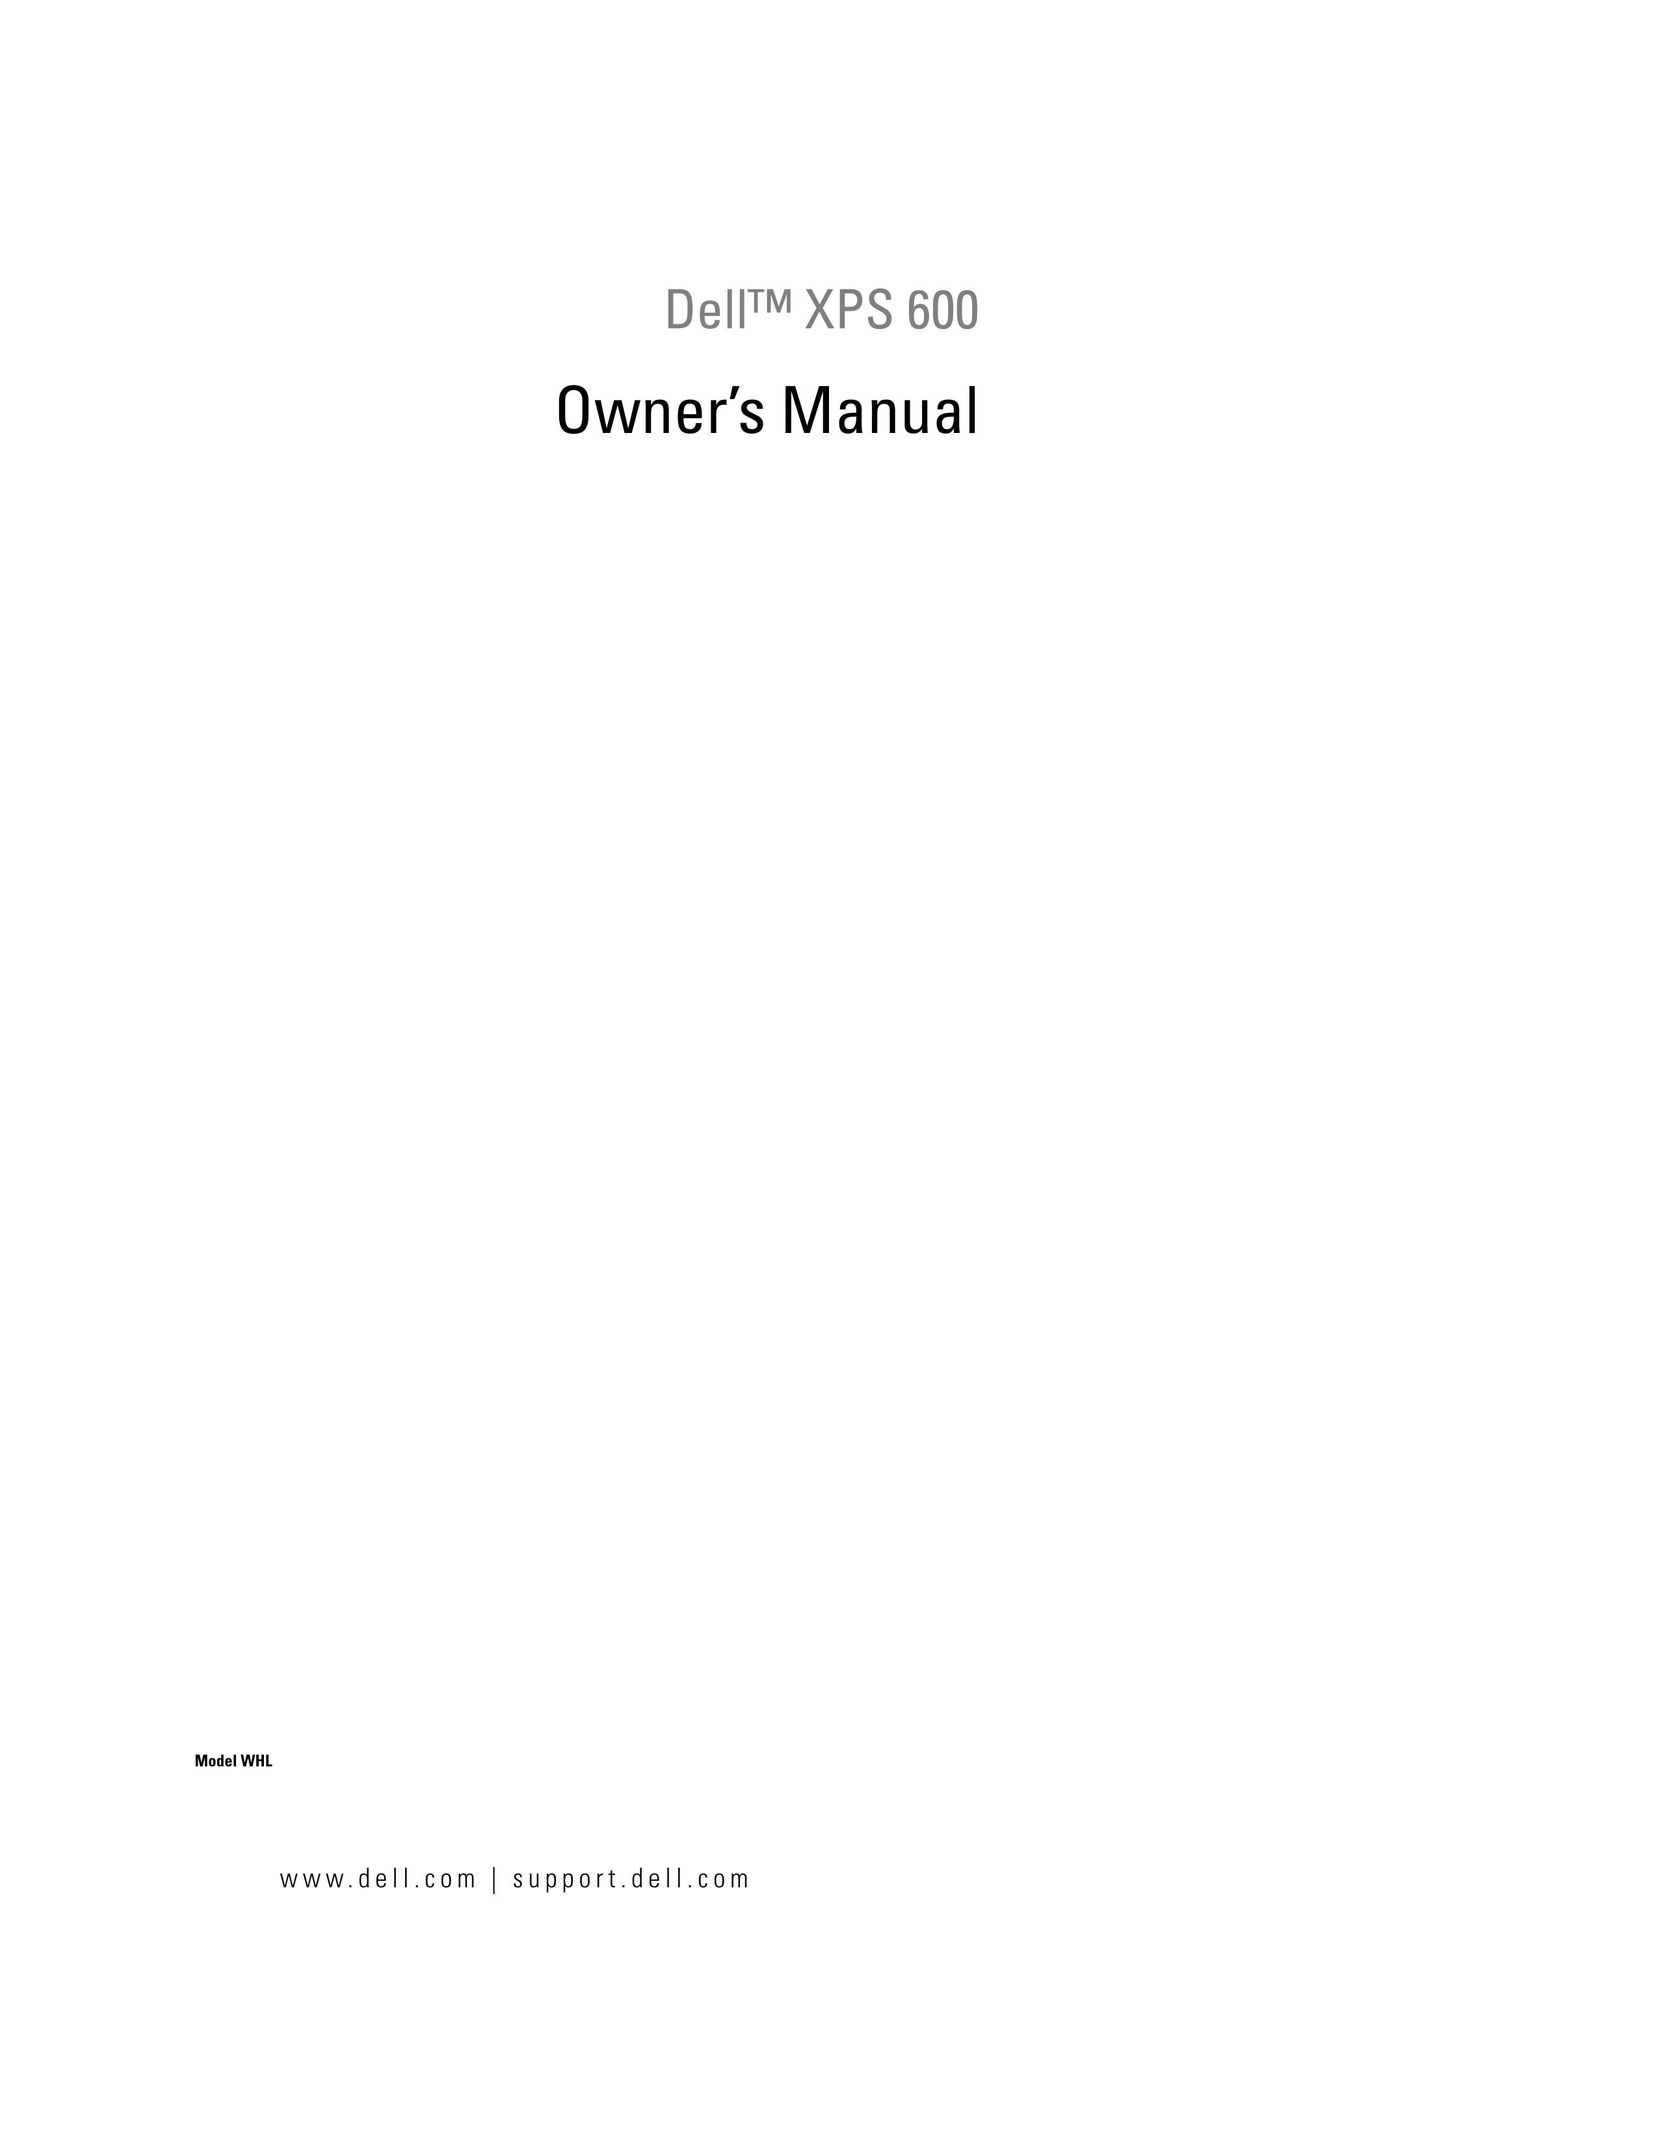 Dell XPS 600 Telephone User Manual